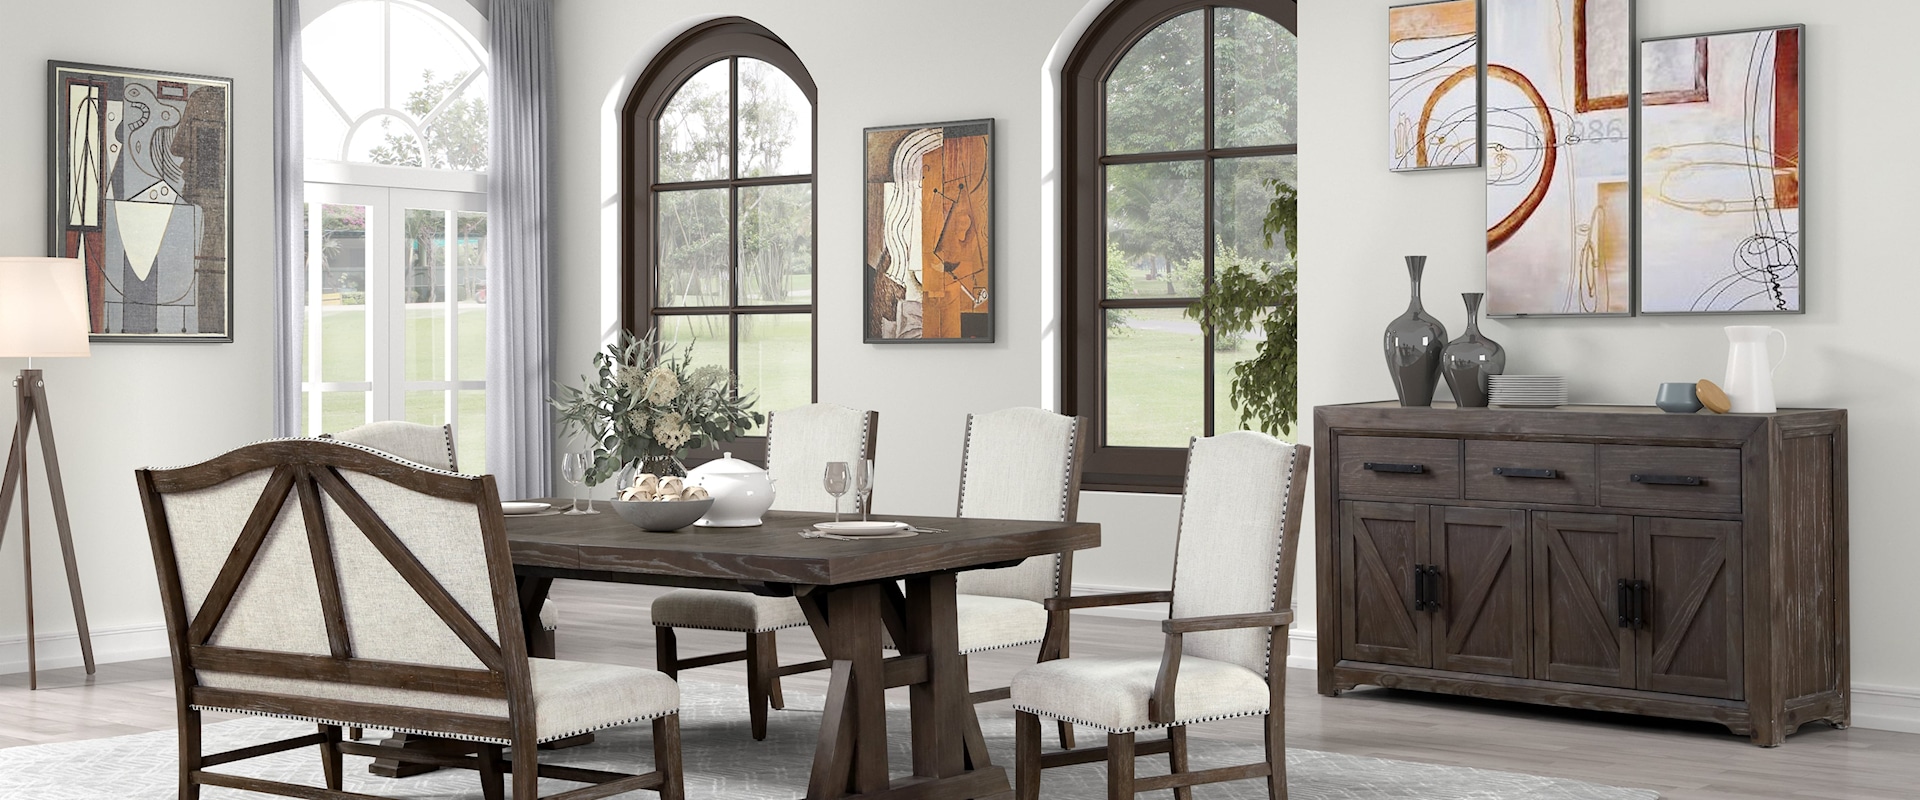 7 Piece Dinette with Bench